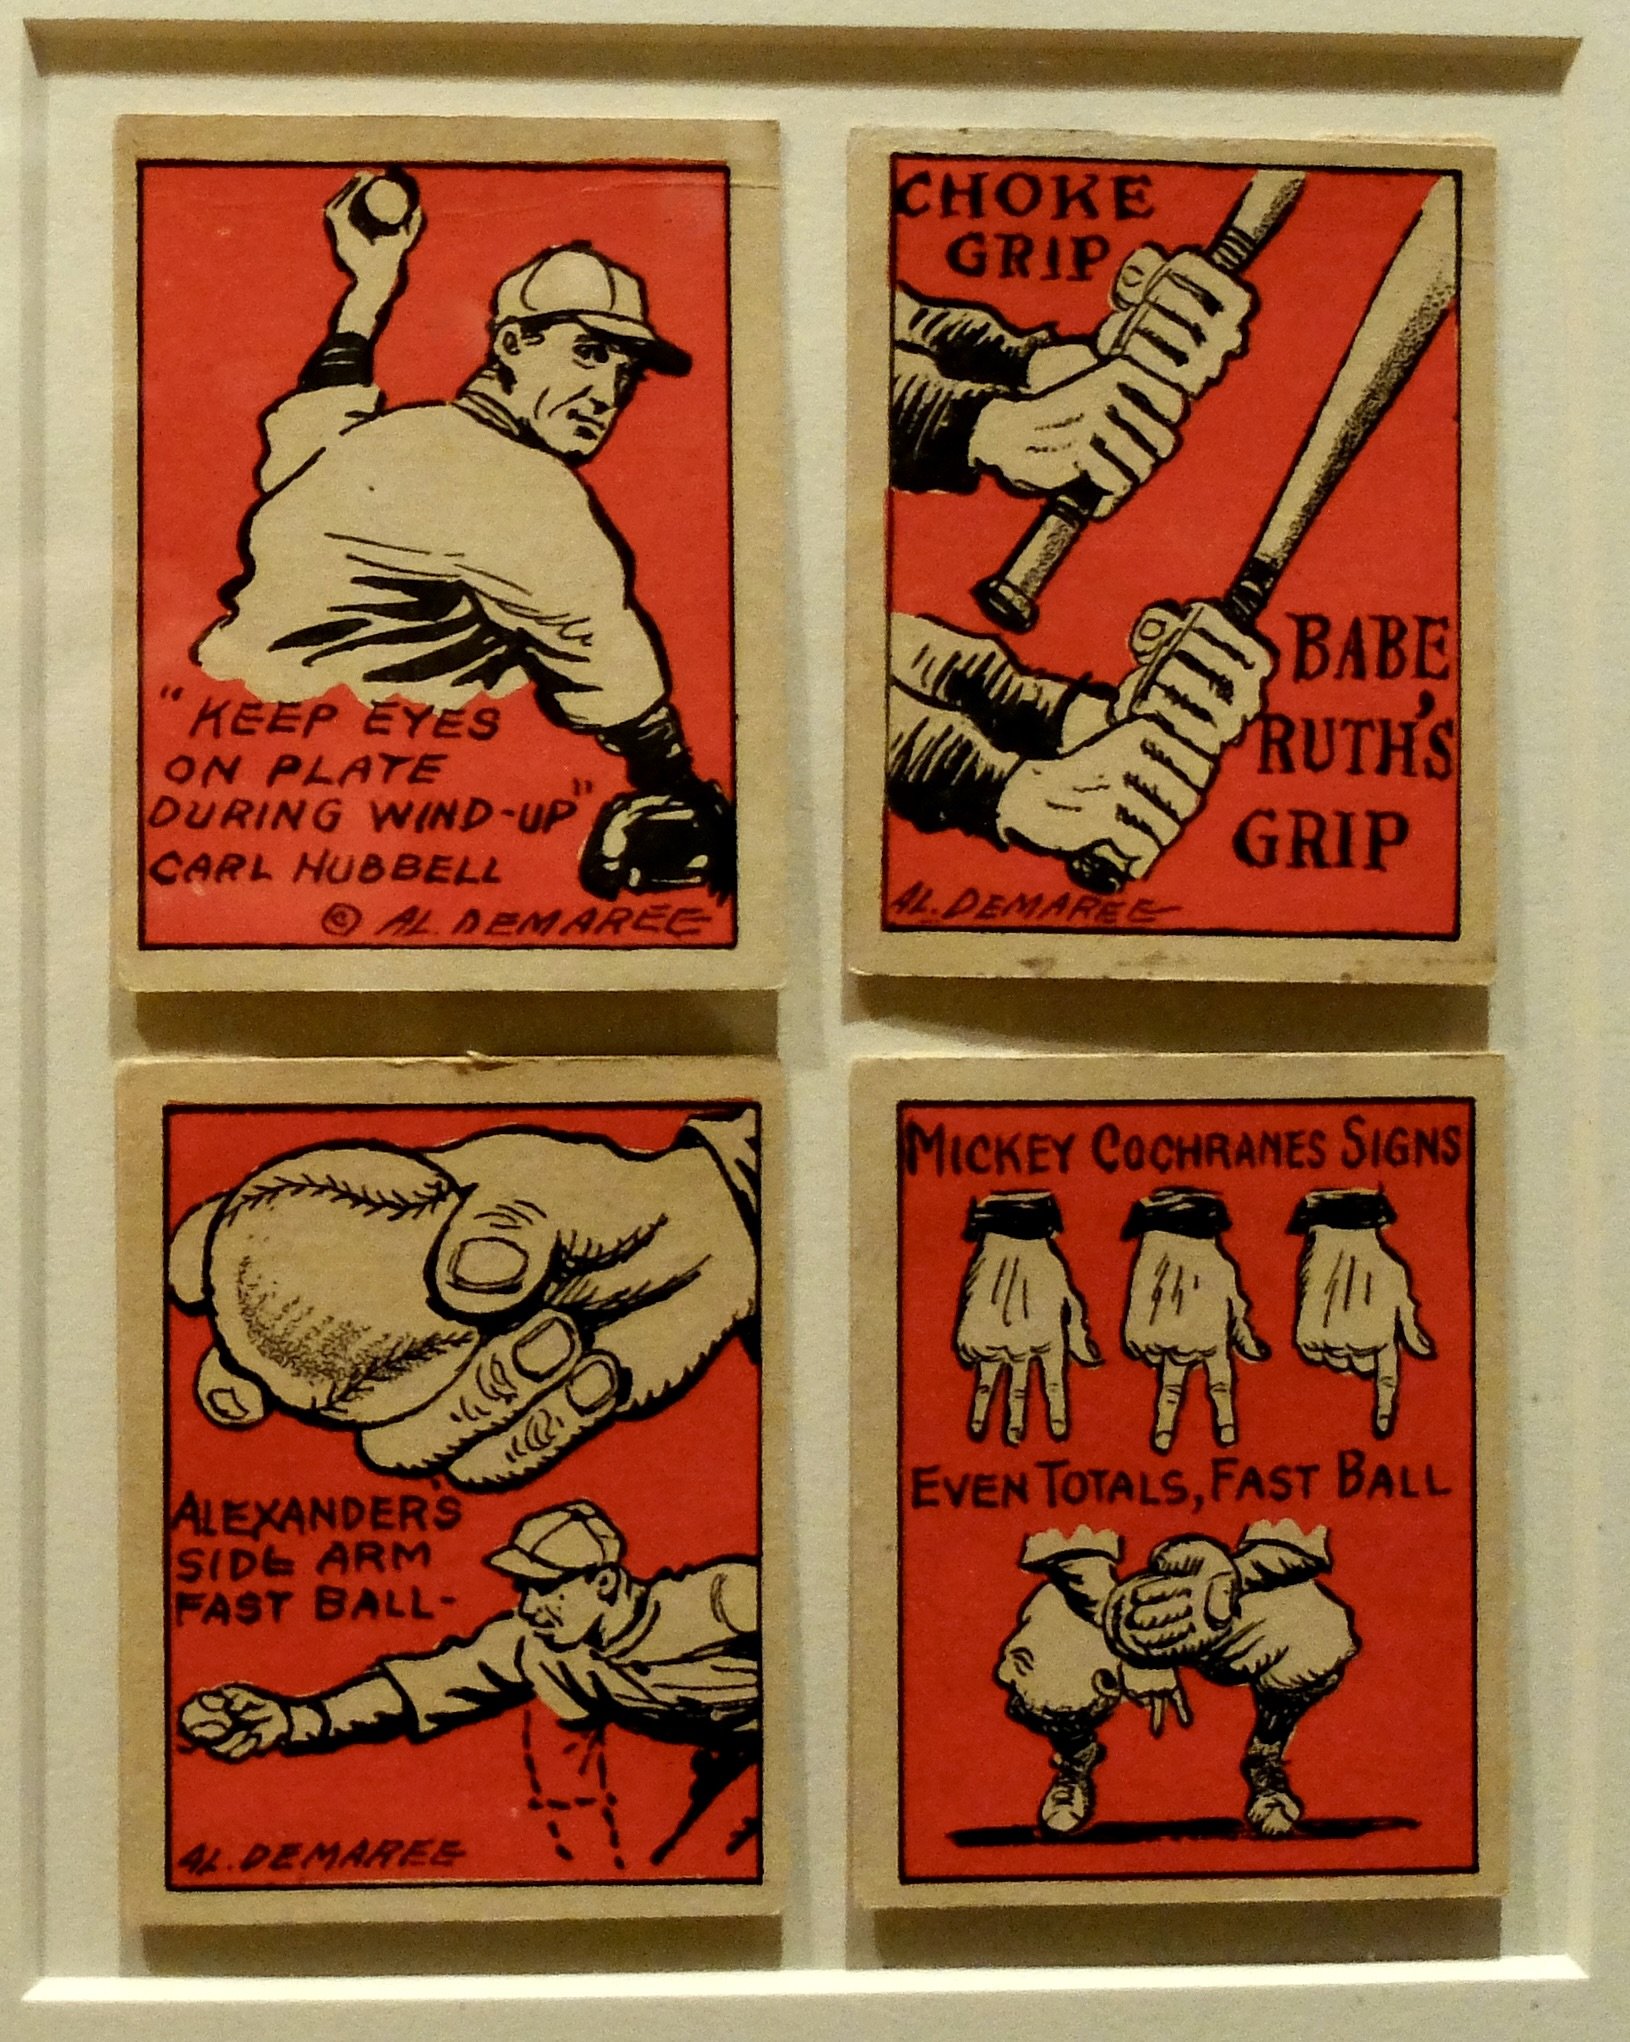  Baseball Cards from the Collection of Jefferson R. Burdick @ the MET.   “This exhibition features over one hundred thirty cards produced between 1887 &amp; 1953…the cards feature legends of the game as well as lesser-known players, owners, and teams